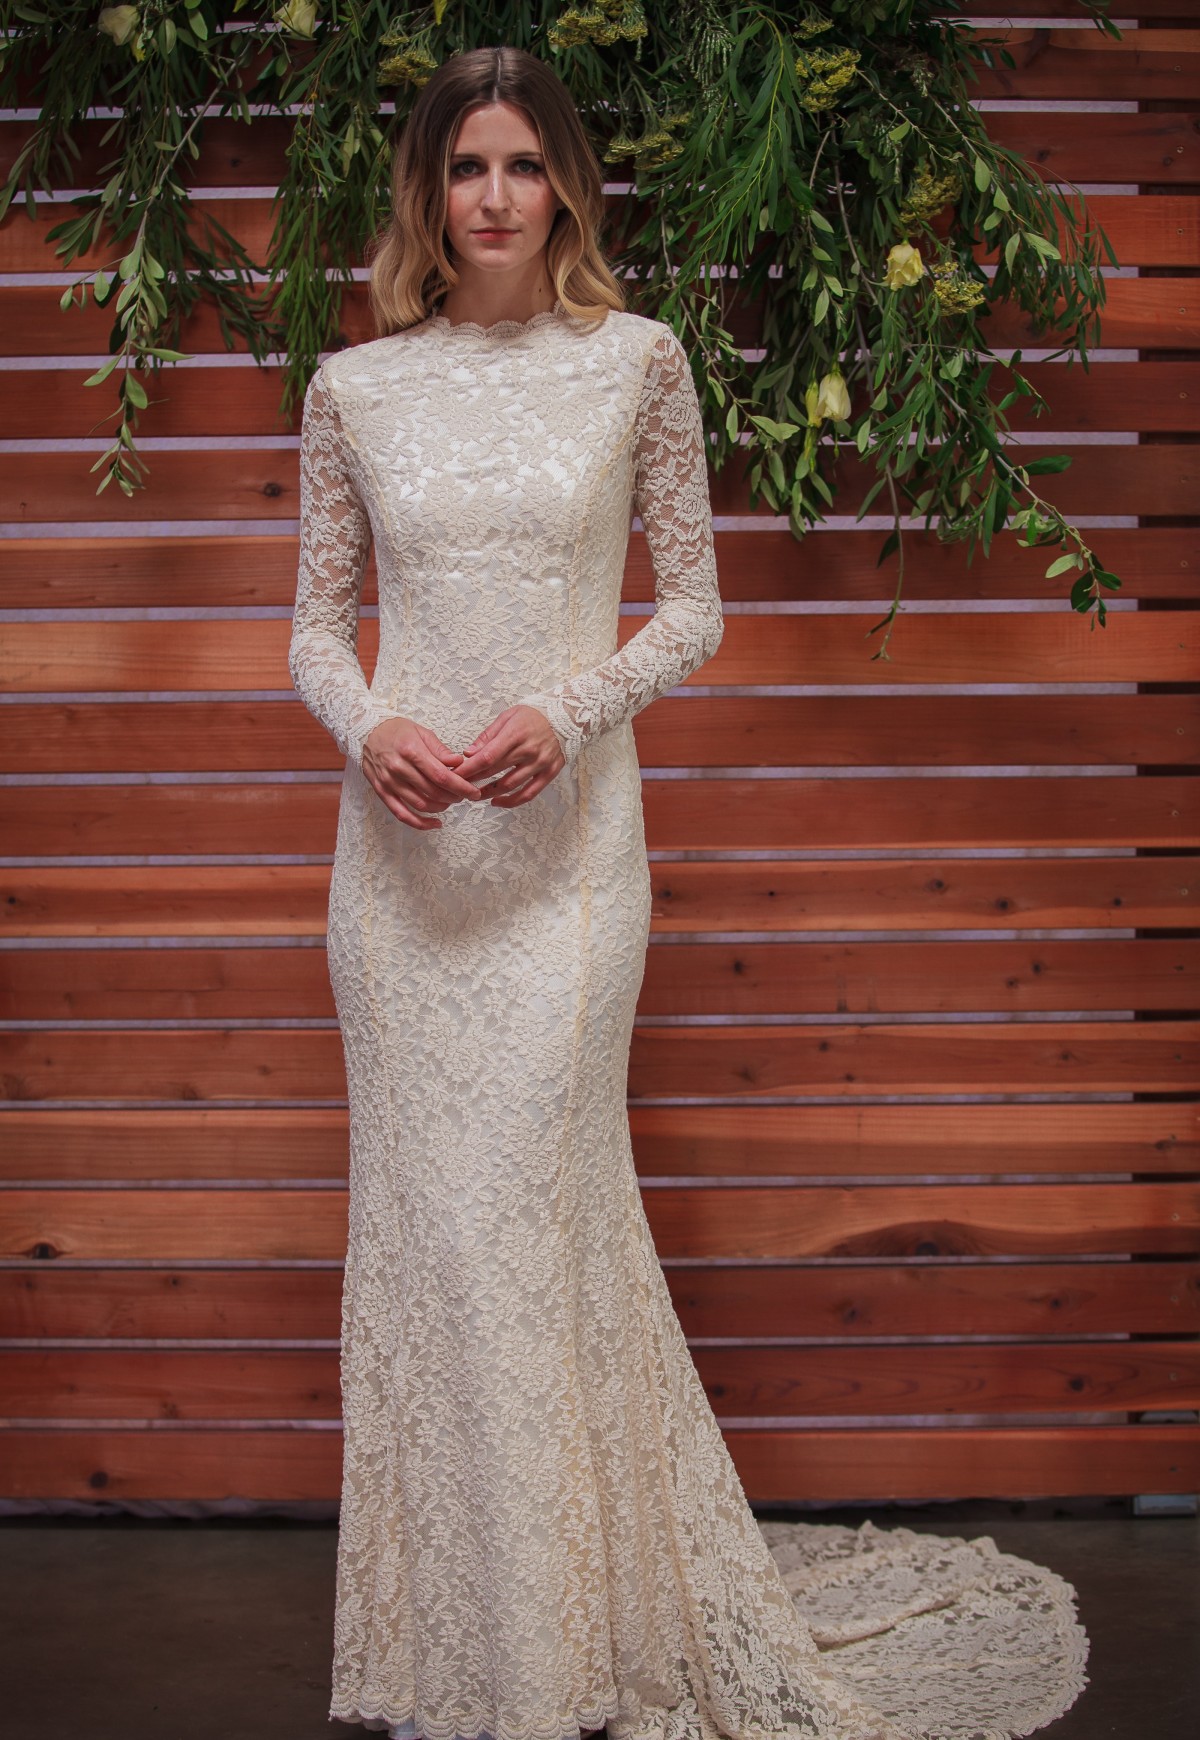 Classic Lace Wedding Dress with Sleeves | Simple and ...
